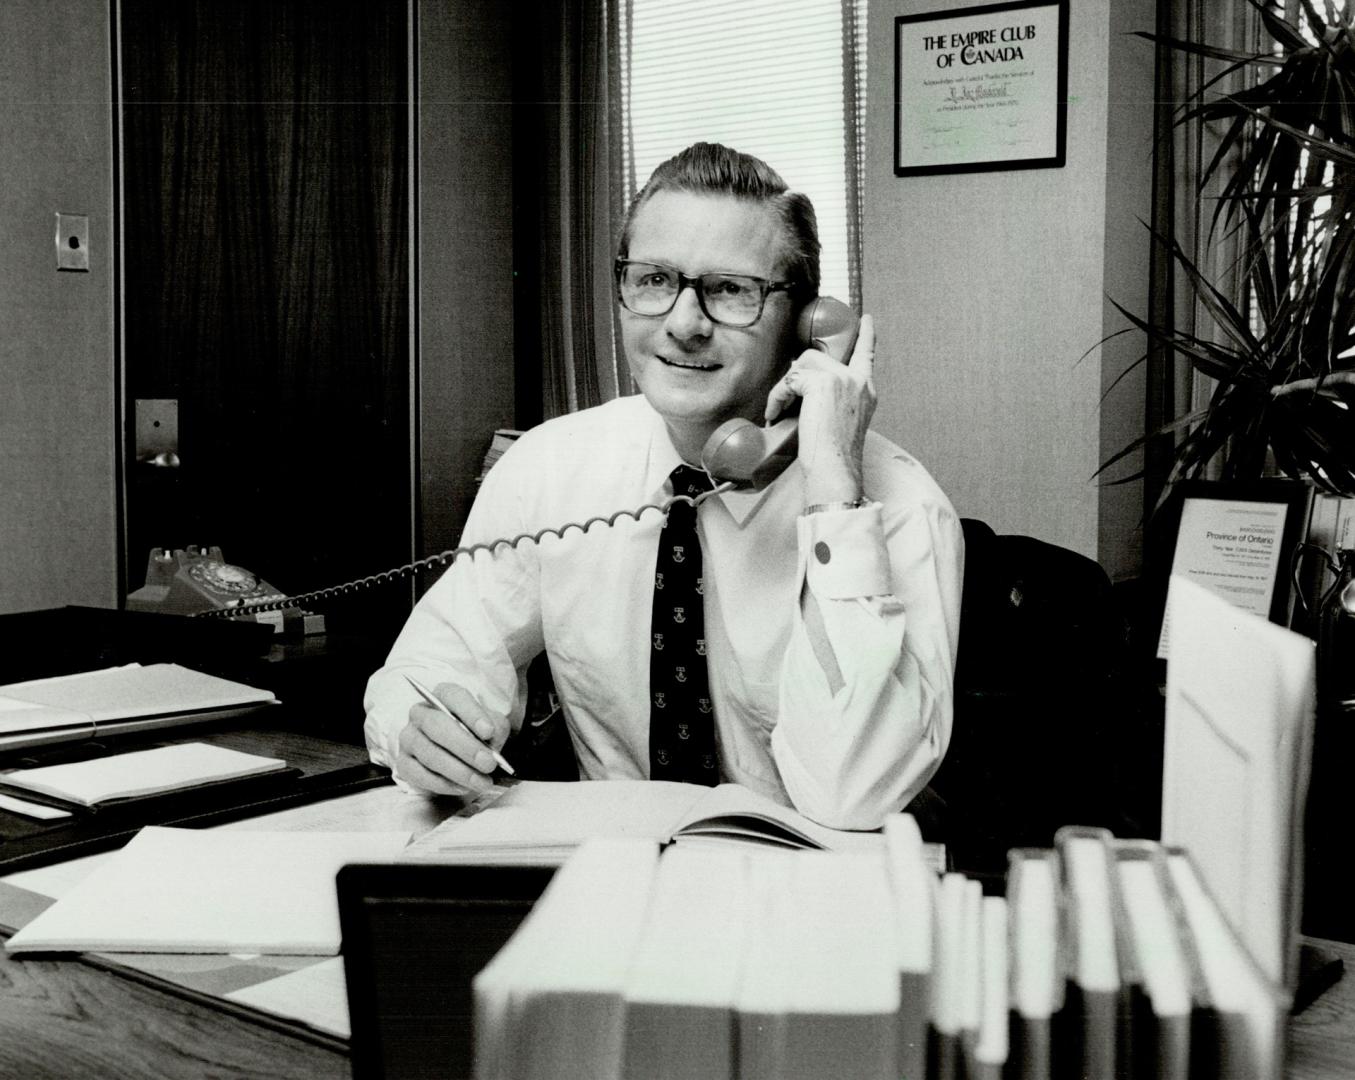 Busy president: Ian Macdonald, 52, is always on the go, working in his office at York Unviersity or letting off steam with his weekly hockey game, which is as much a part of his life today as it was back in 1973 when the photo at right was taken